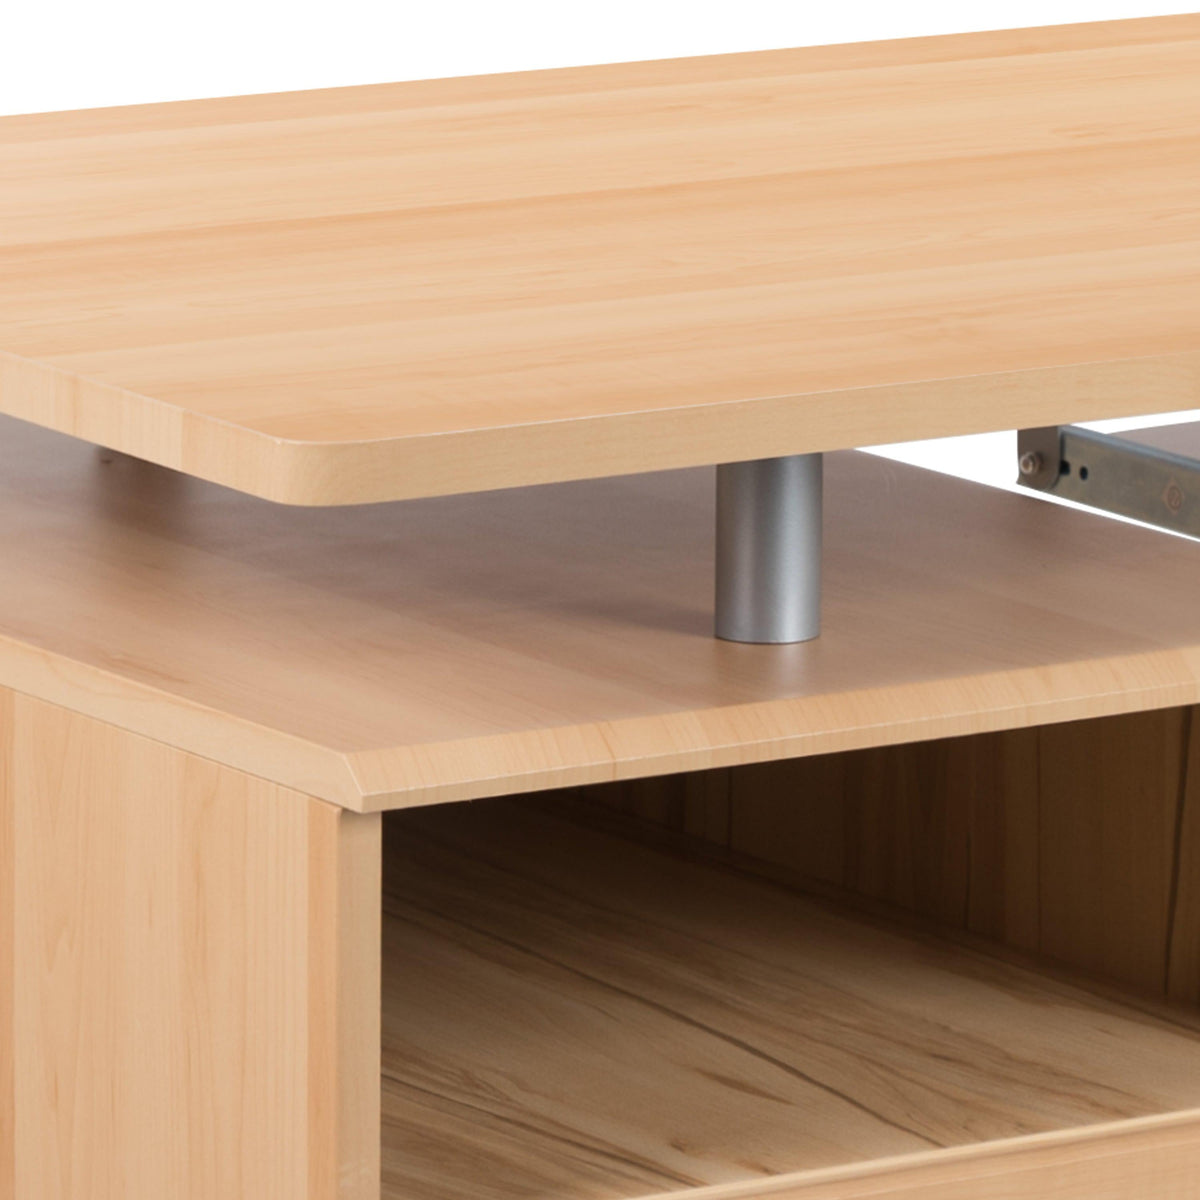 Maple |#| Maple Desk with Three Drawer Single Pedestal and Pull-Out Keyboard Tray